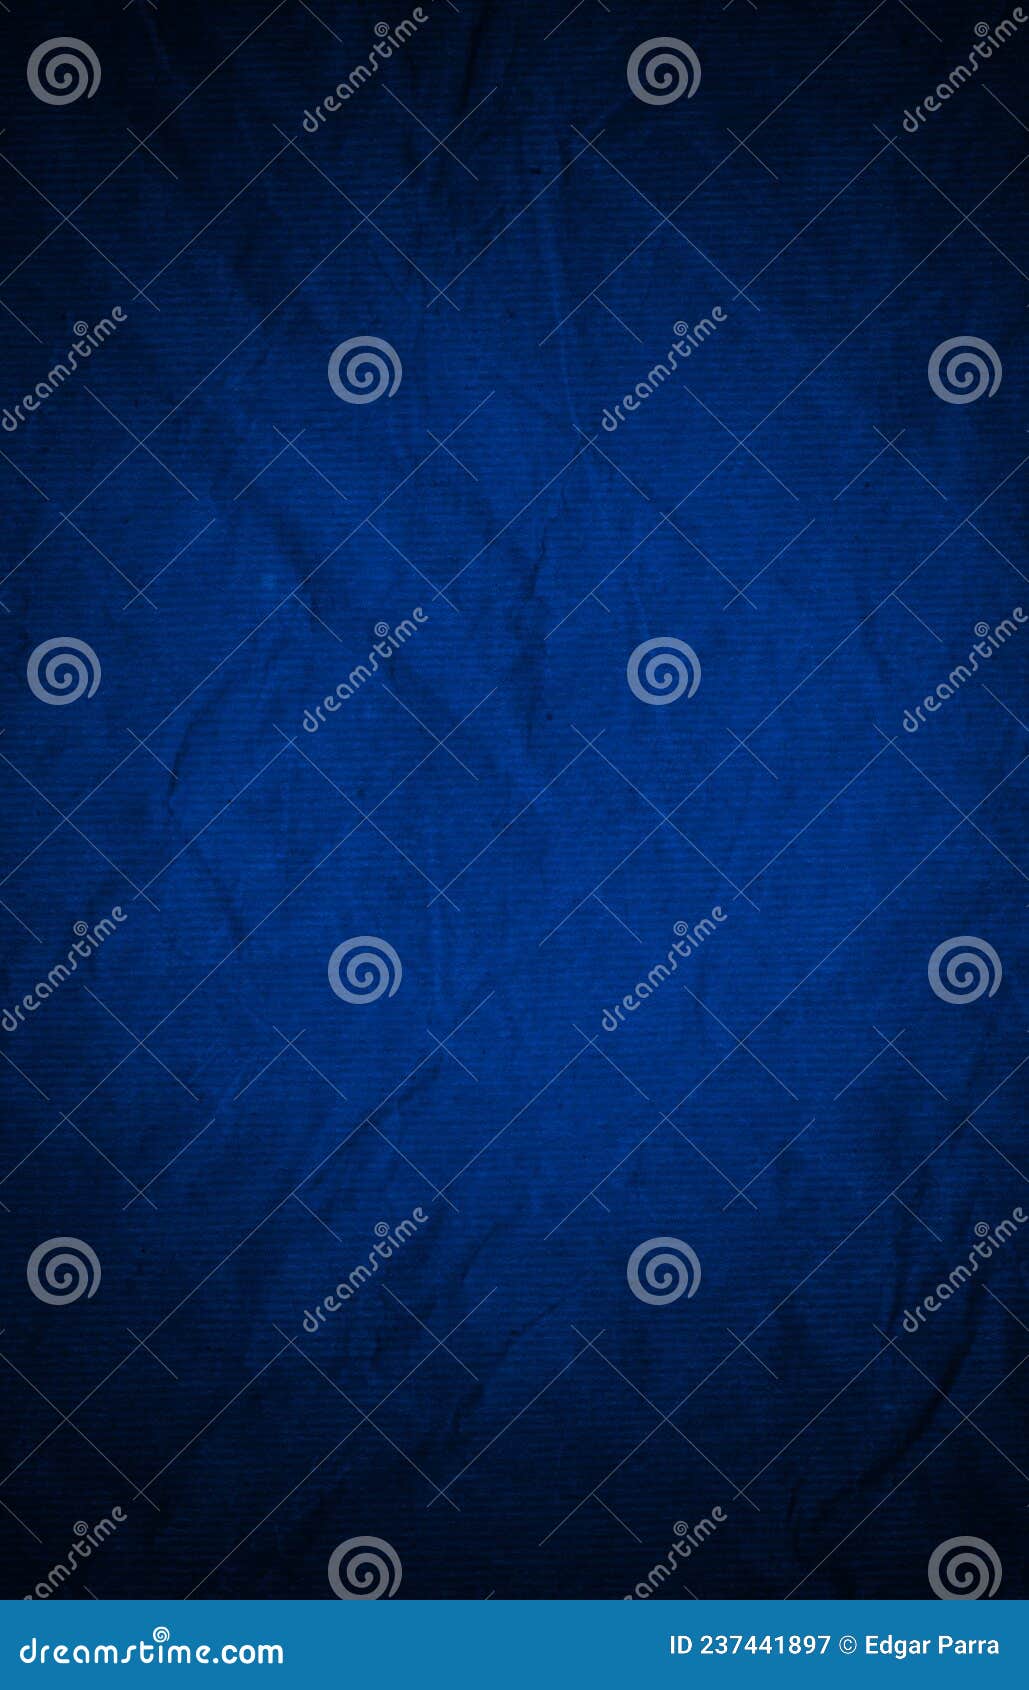 Rough Navy Blue Paper Texture. Blue Crumpled Paper Texture and